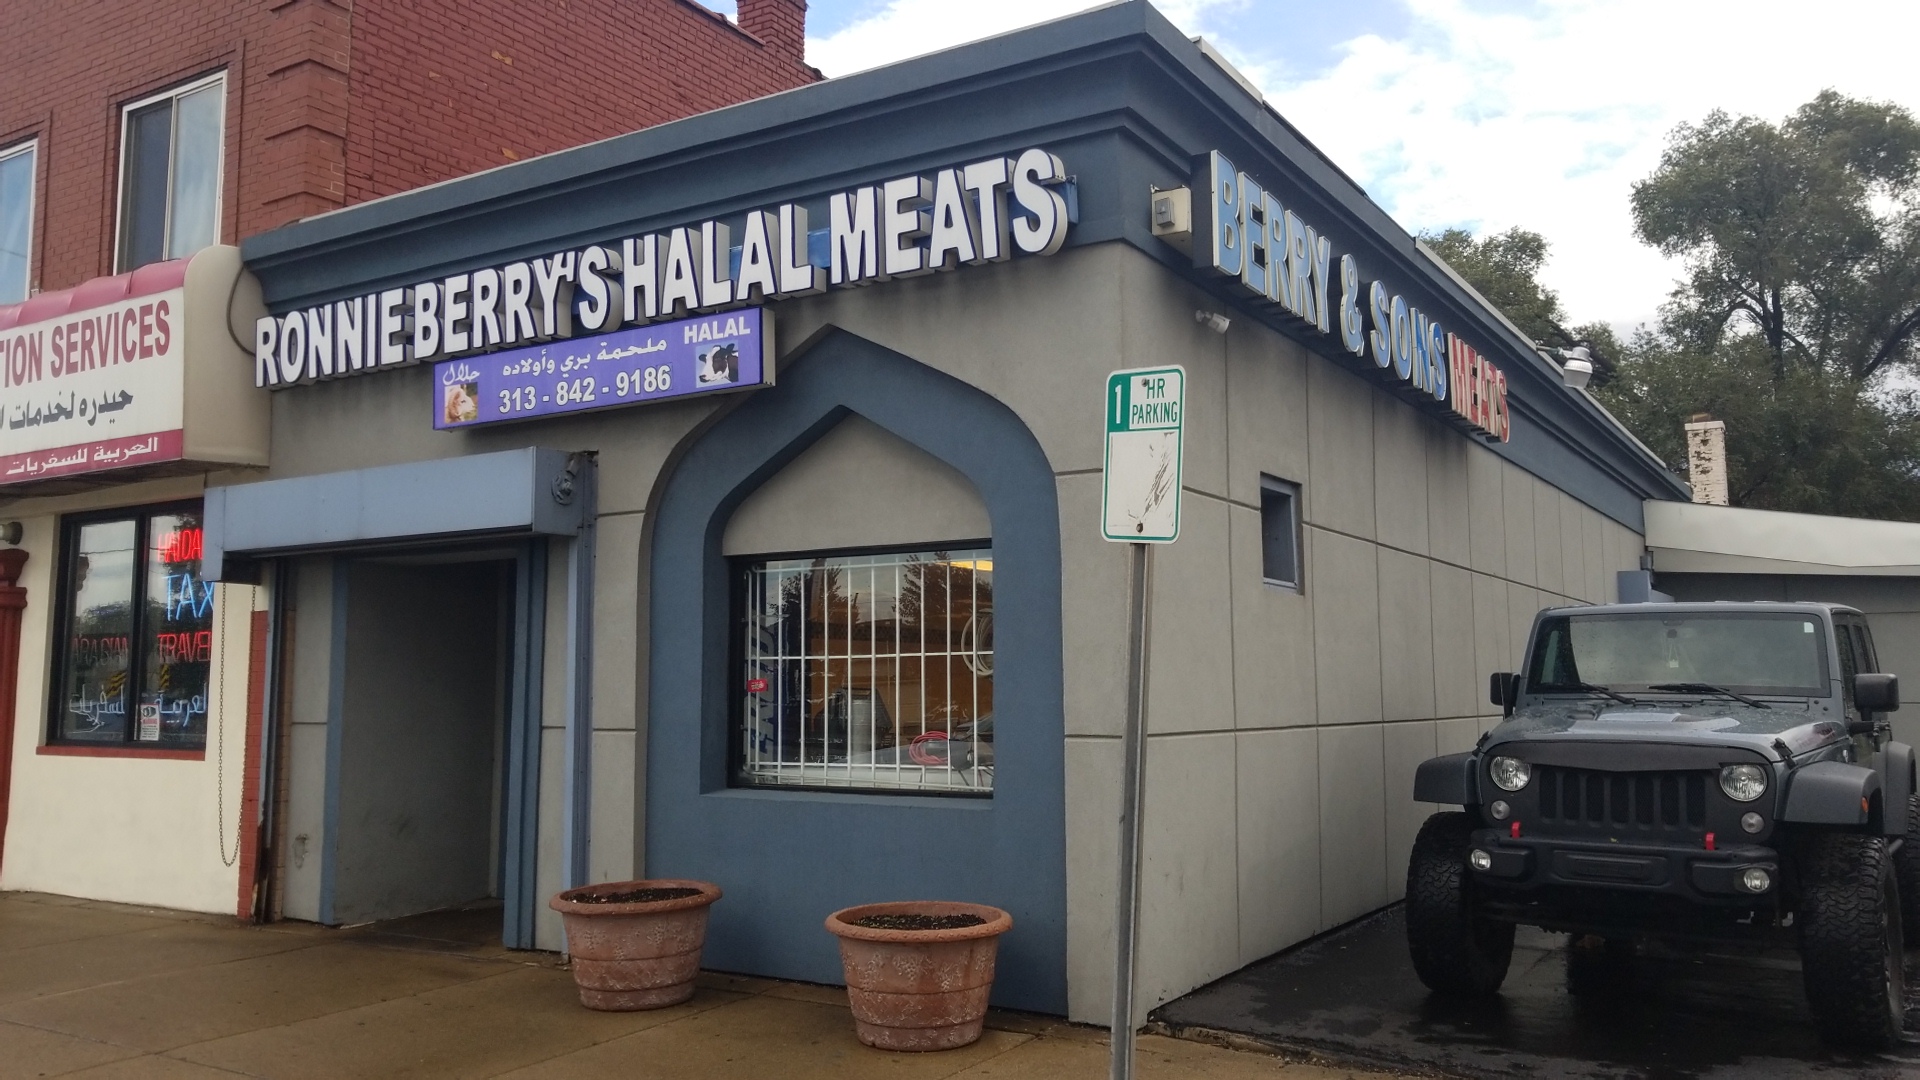 Ronnie Berry And Sons Halal Meats